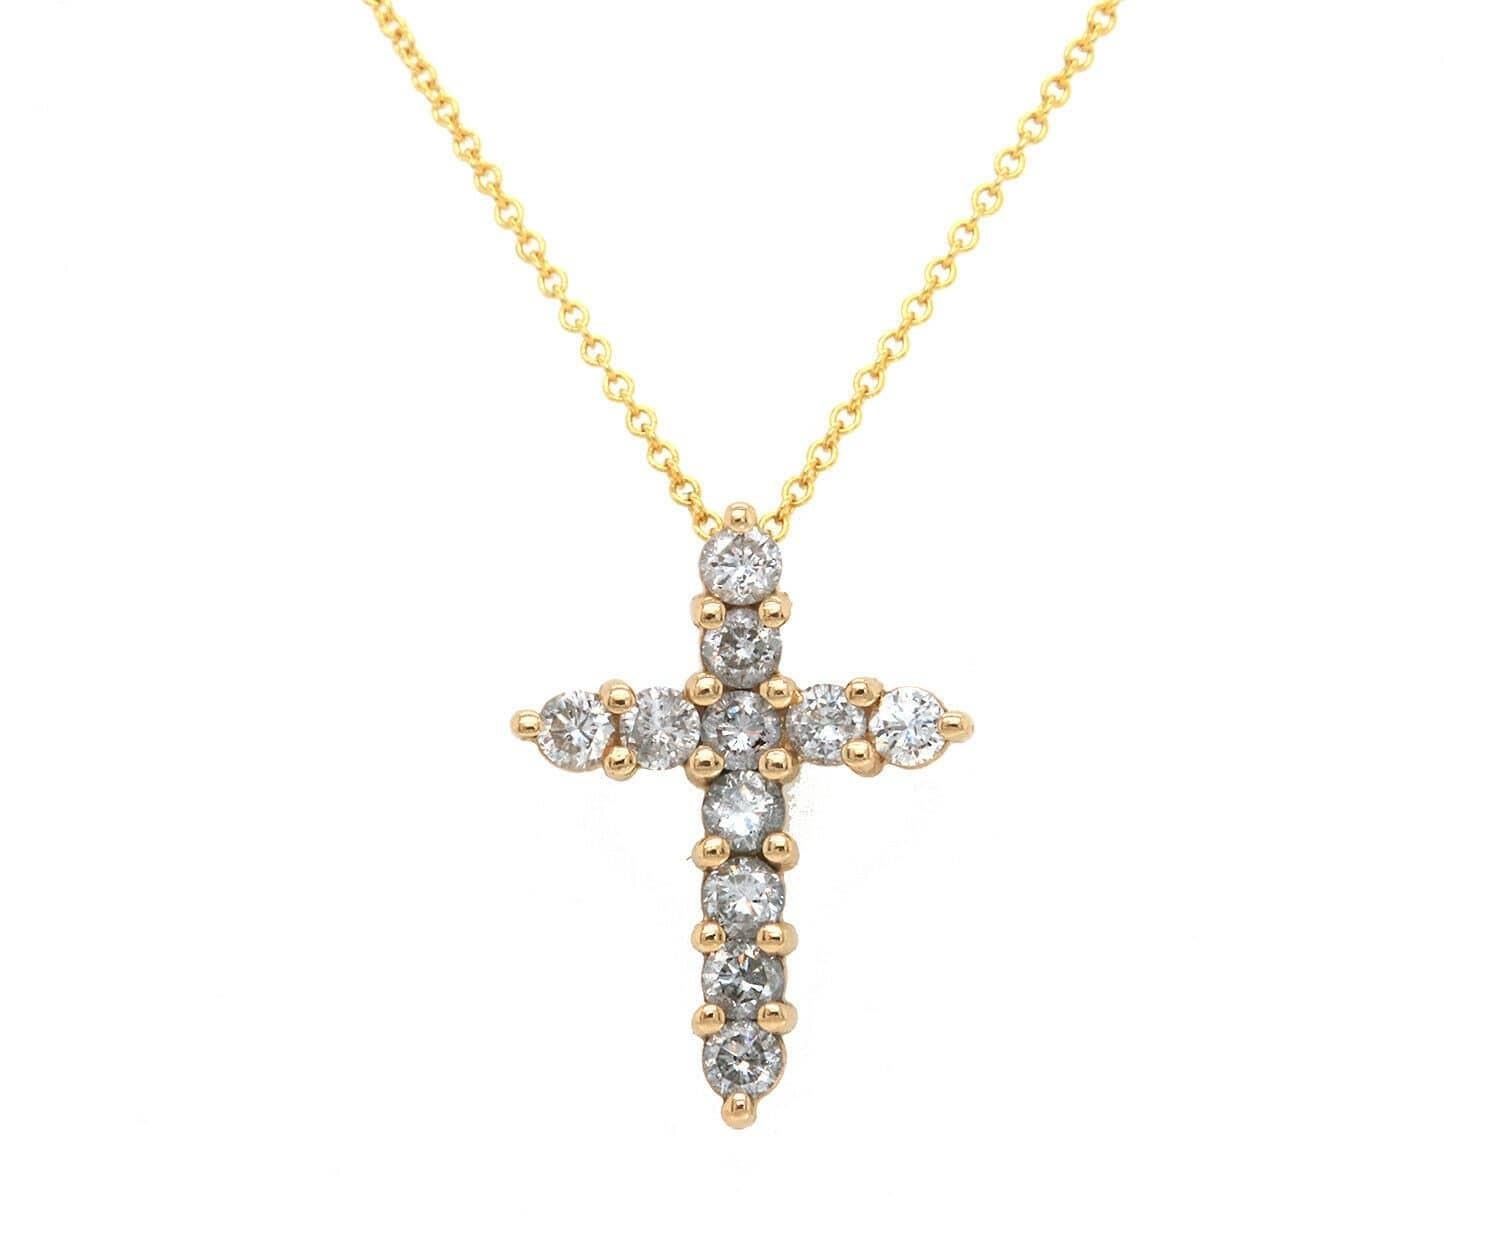 0.60ctw Diamond Cross Pendant Necklace 14K Yellow Gold

Diamond Cross Pendant Necklace
14K Yellow Gold
Diamond Weight: 0.60ct
Diamond Clarity: SI2-I1
Diamond Color: H-I
Chain Length: 18.0 Inches
Pendant Size: 20mm x 15mm
Necklace Weight: 3.4